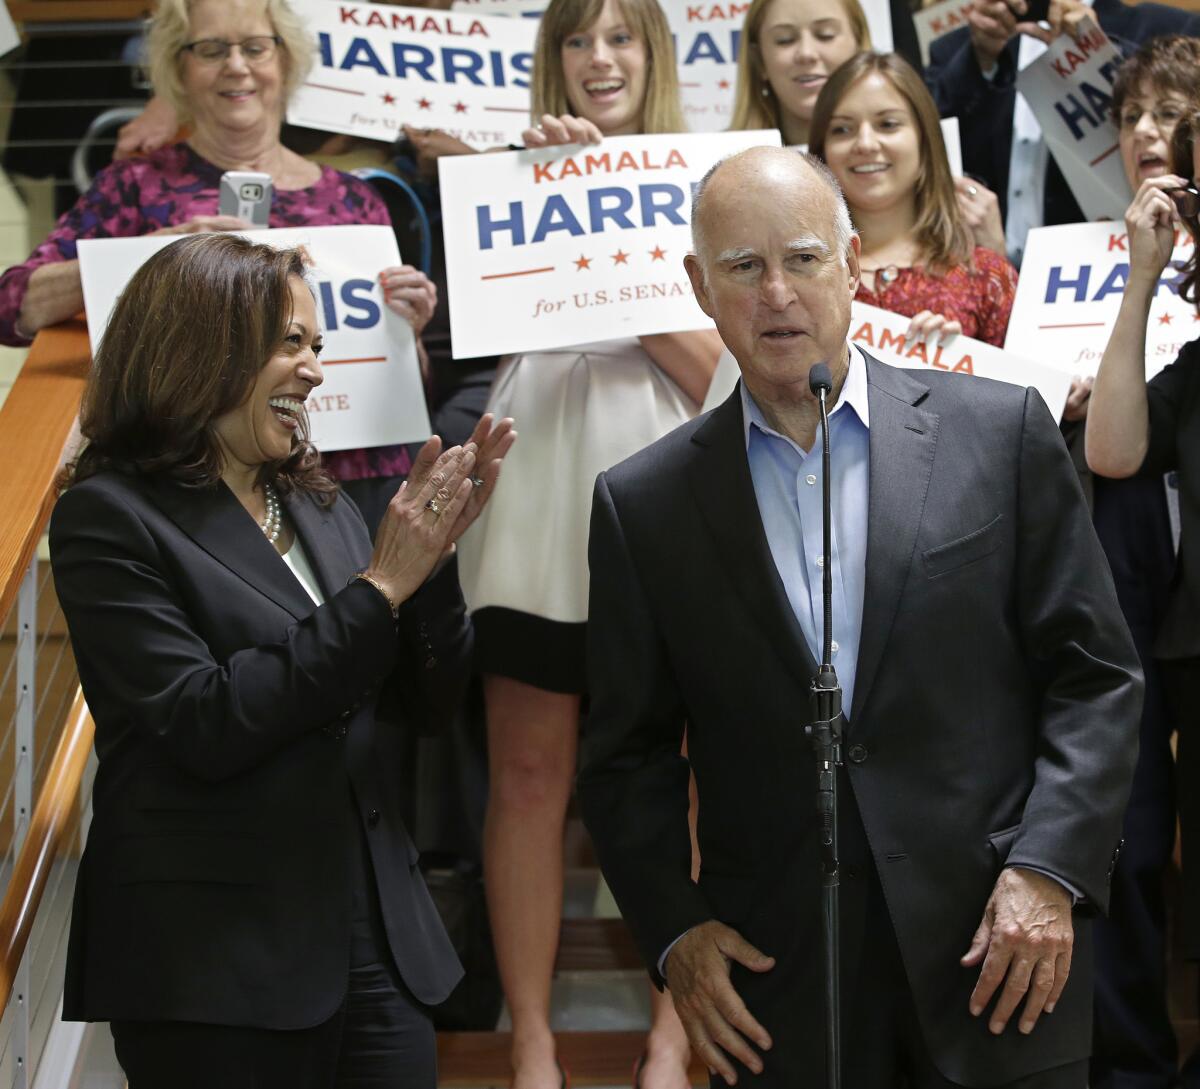 State Atty. Gen. Kamala Harris smiles and claps as Gov. Jerry Brown endorses her for the U.S. Senate.